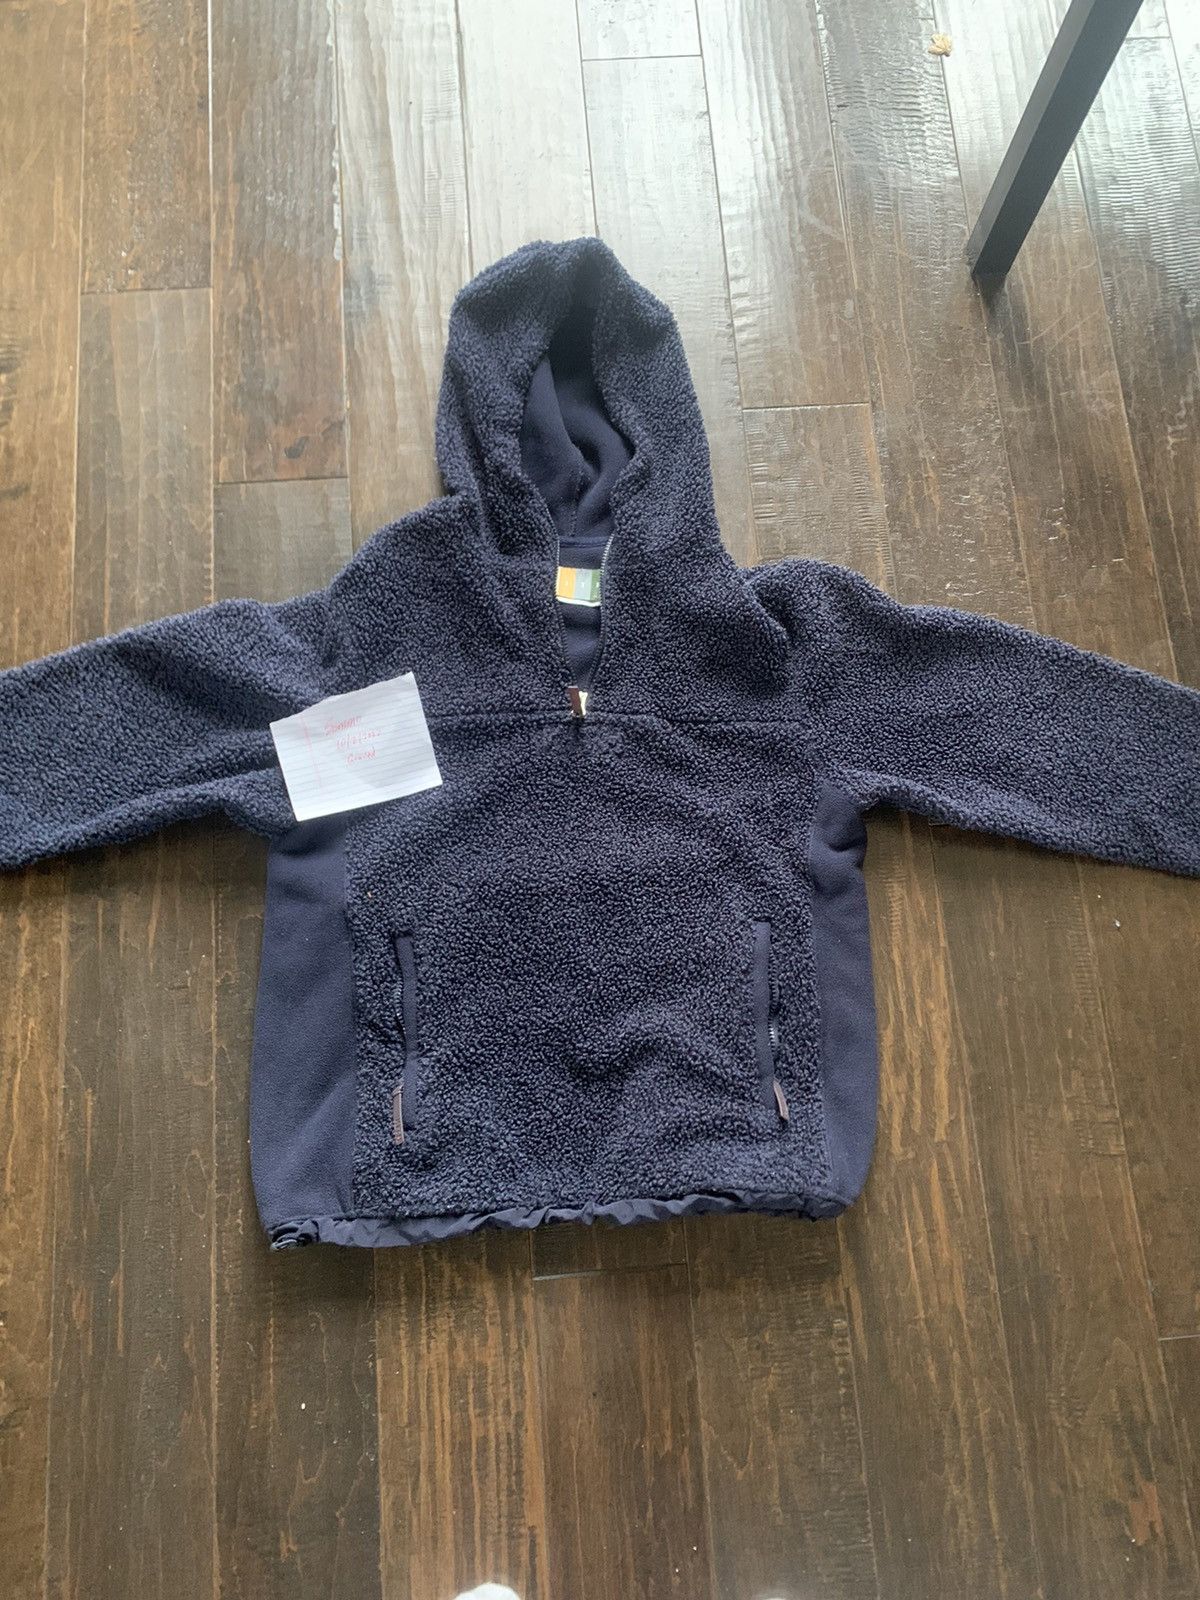 Kith KITH BONDED SHERPA QUARTER ZIP HOODIE - NOCTURNAL | Grailed